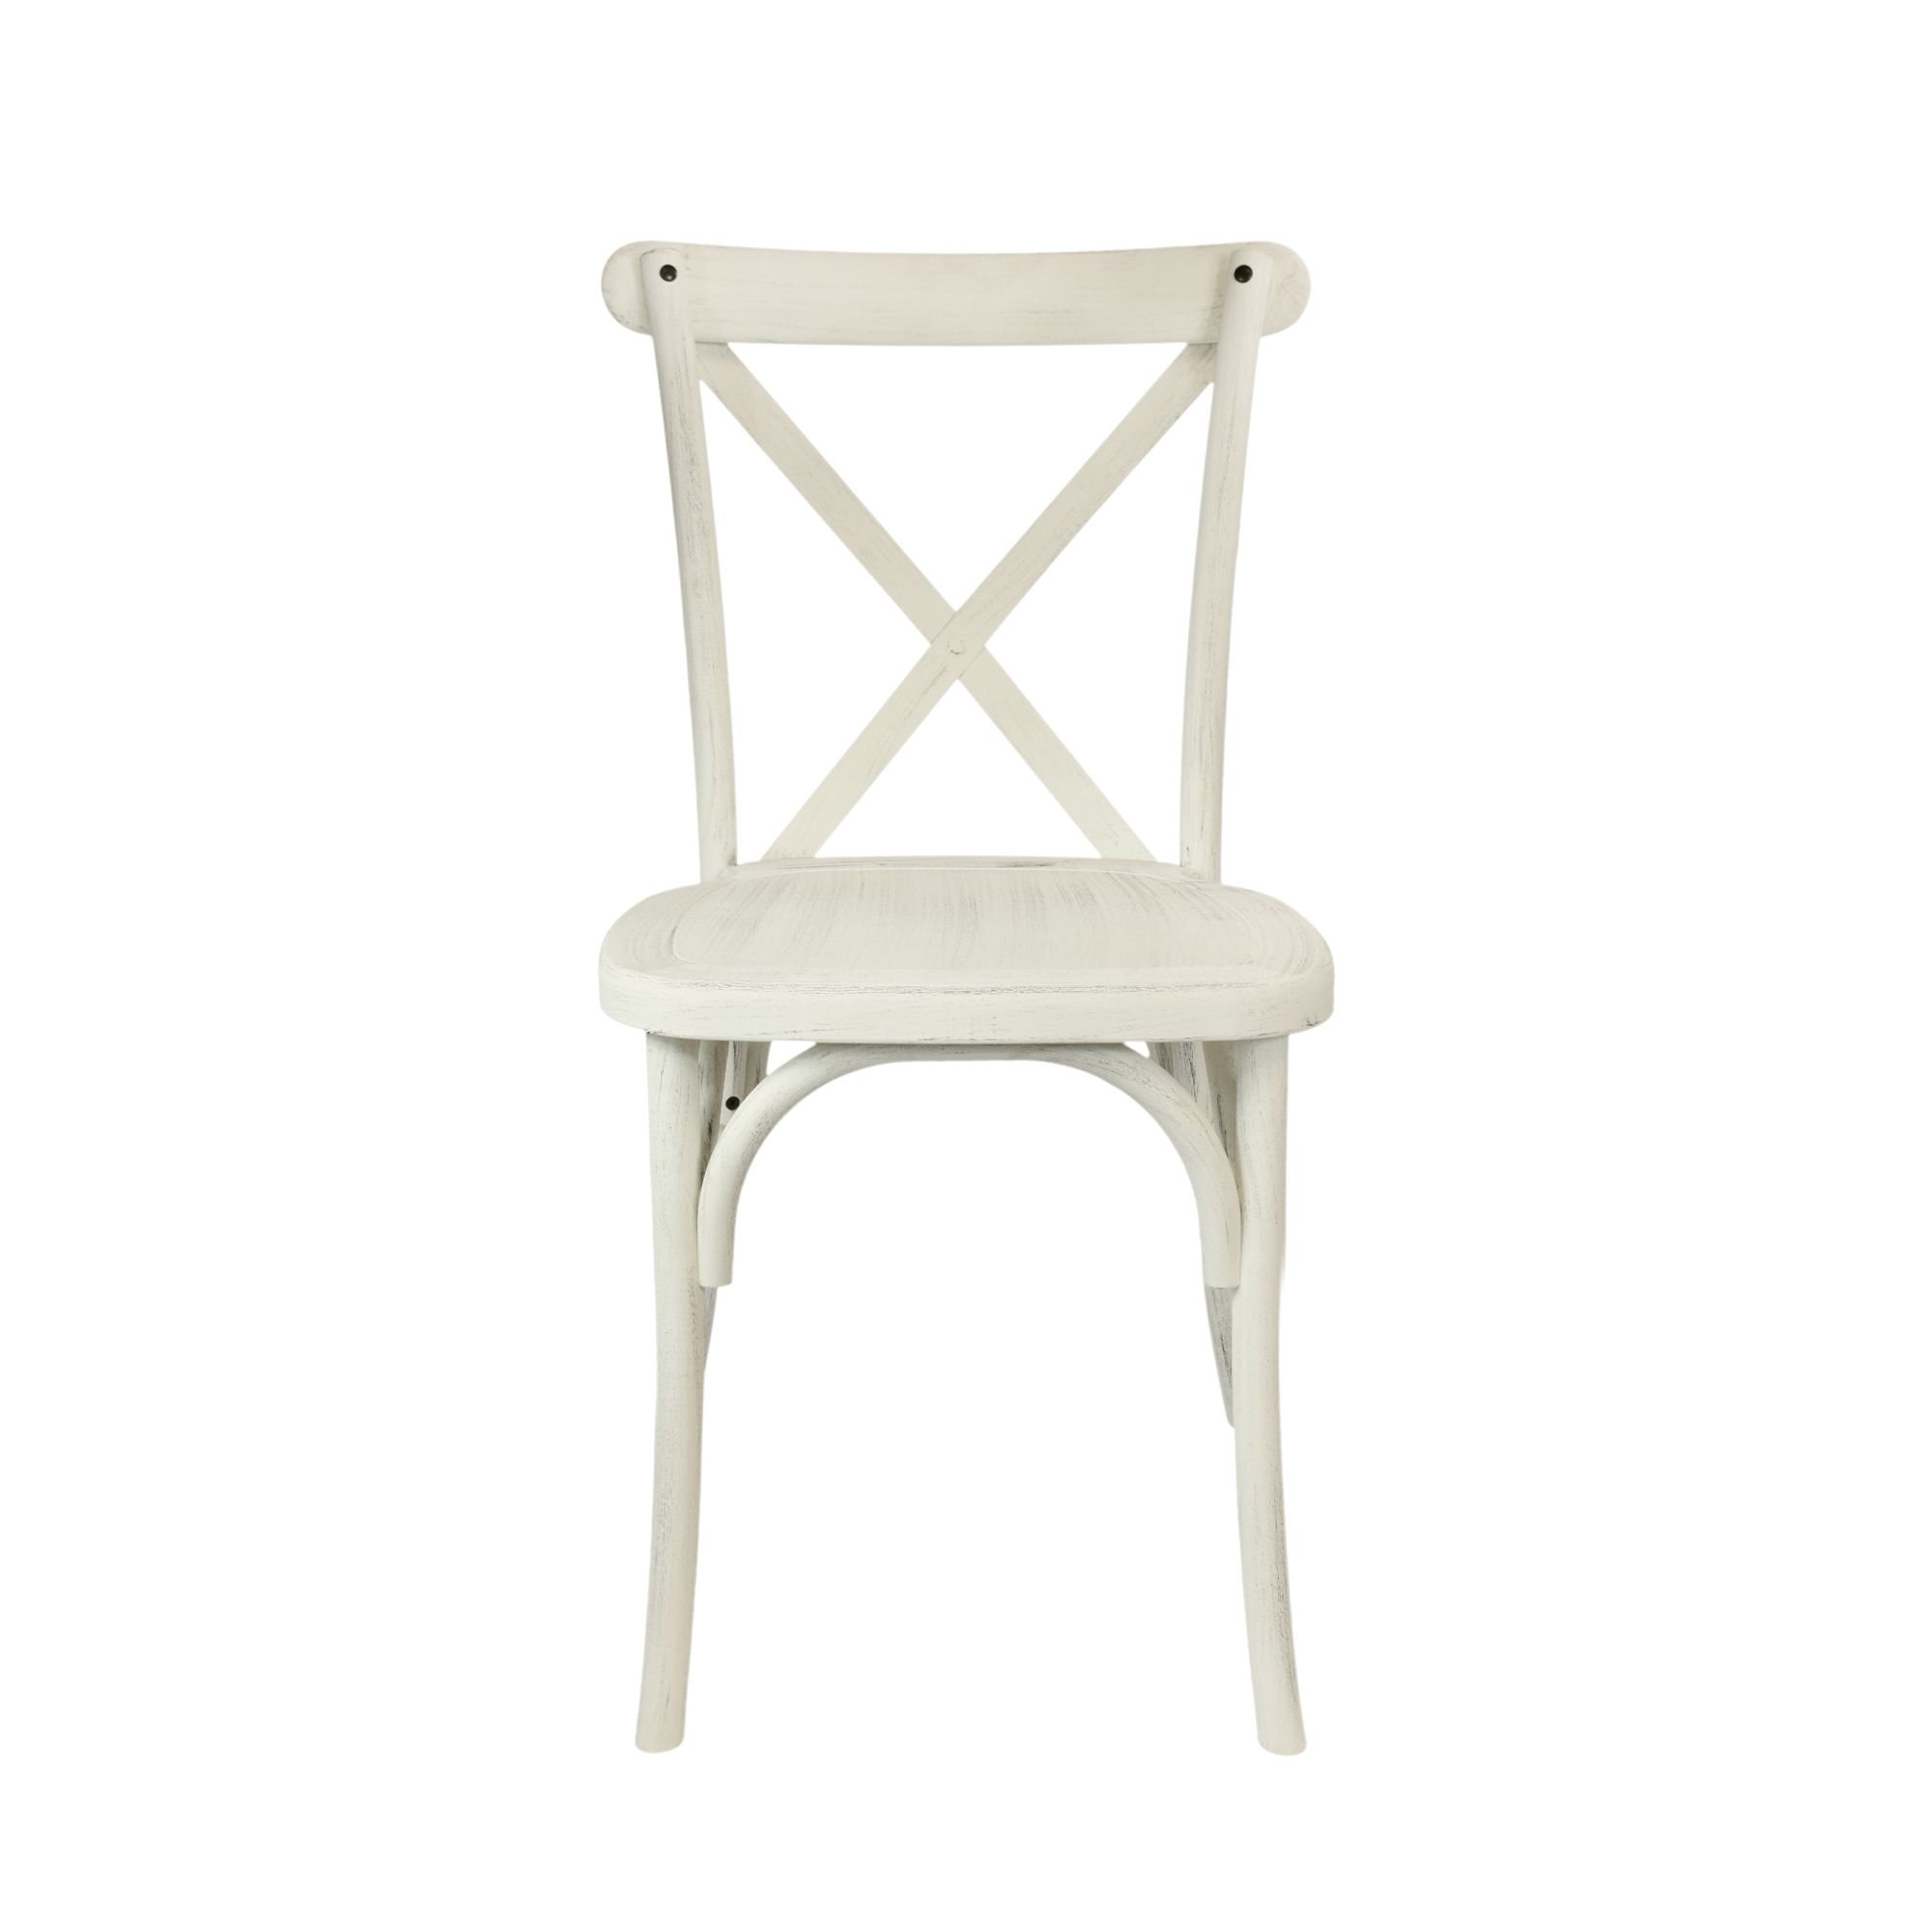 Chair Crossback Resin White Distressed Steel Core C Series CXRWD STEEL CX T Back